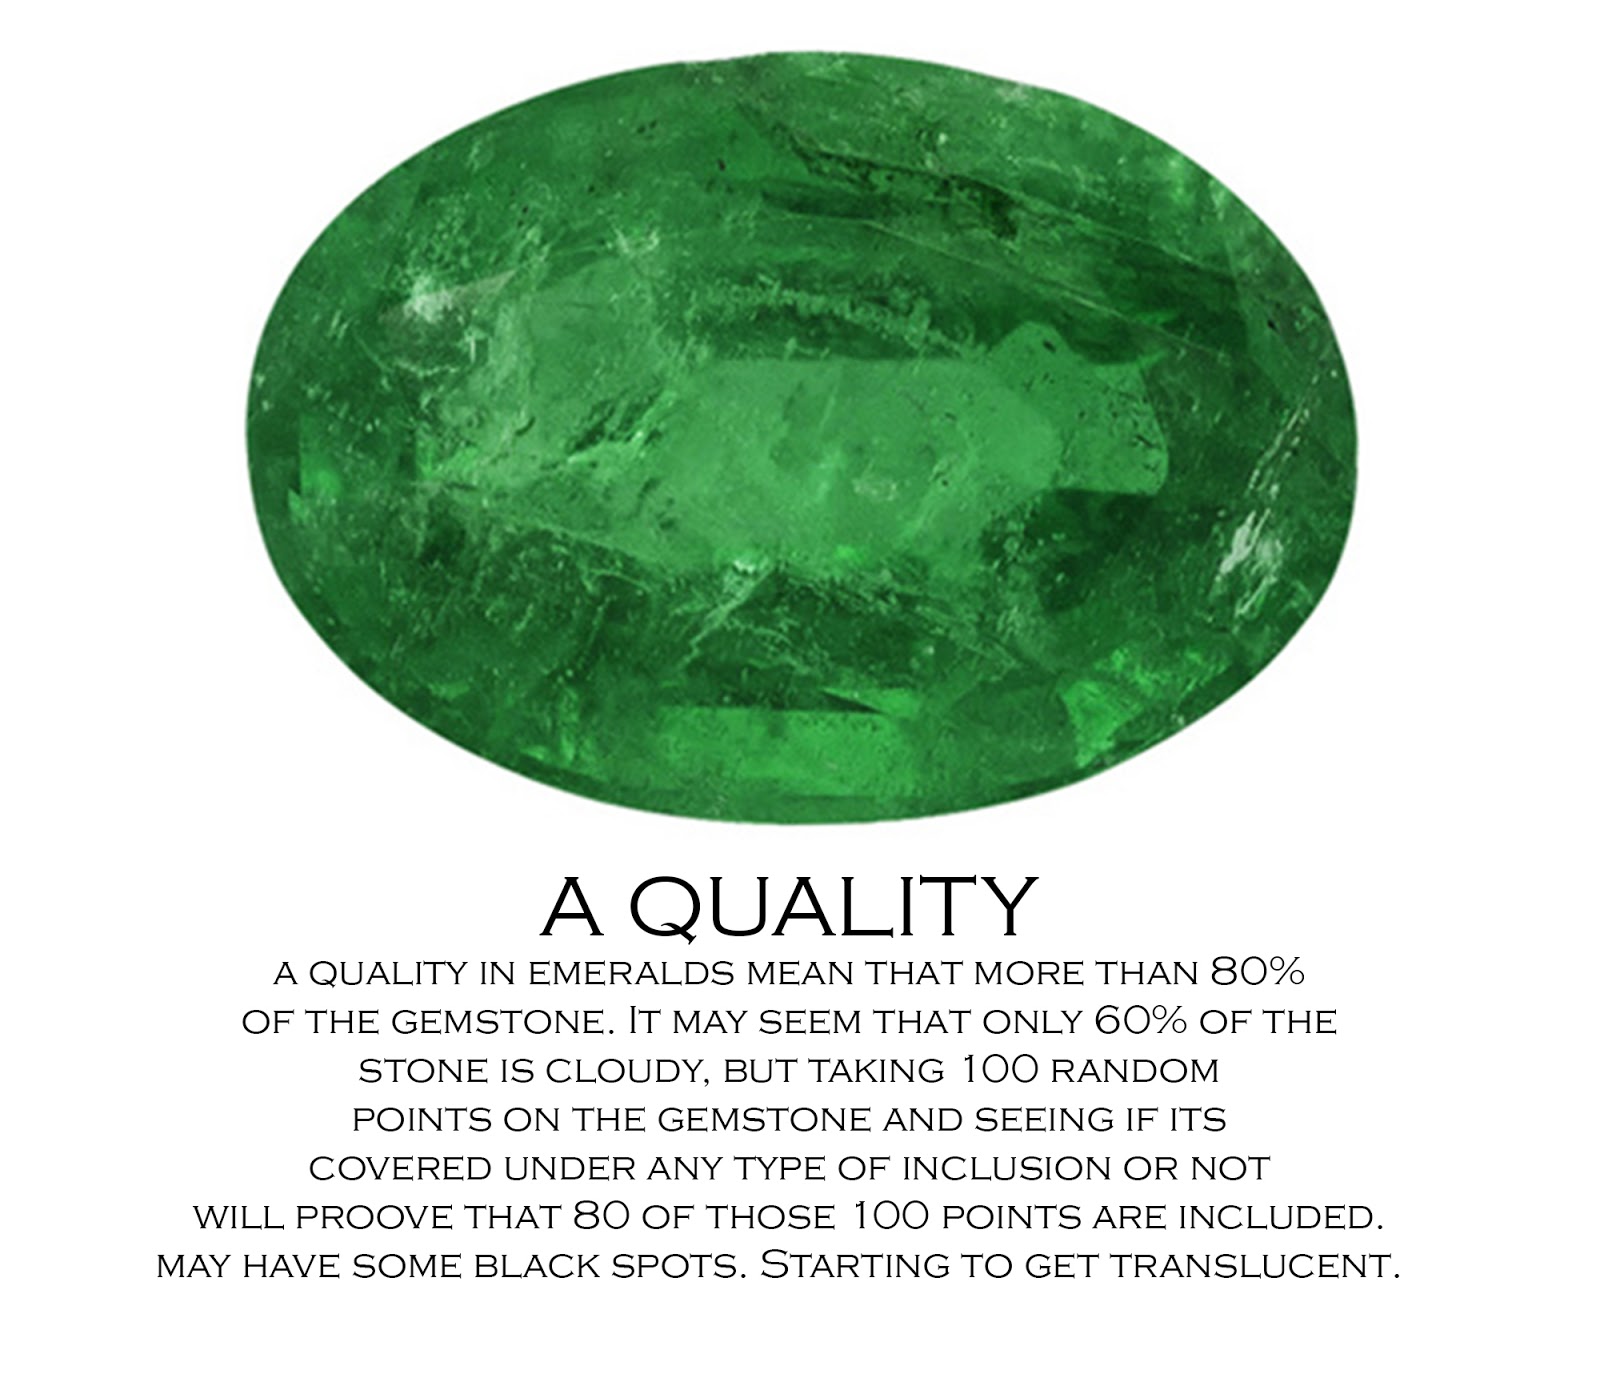 Emerald quality chart - World's first of a kind